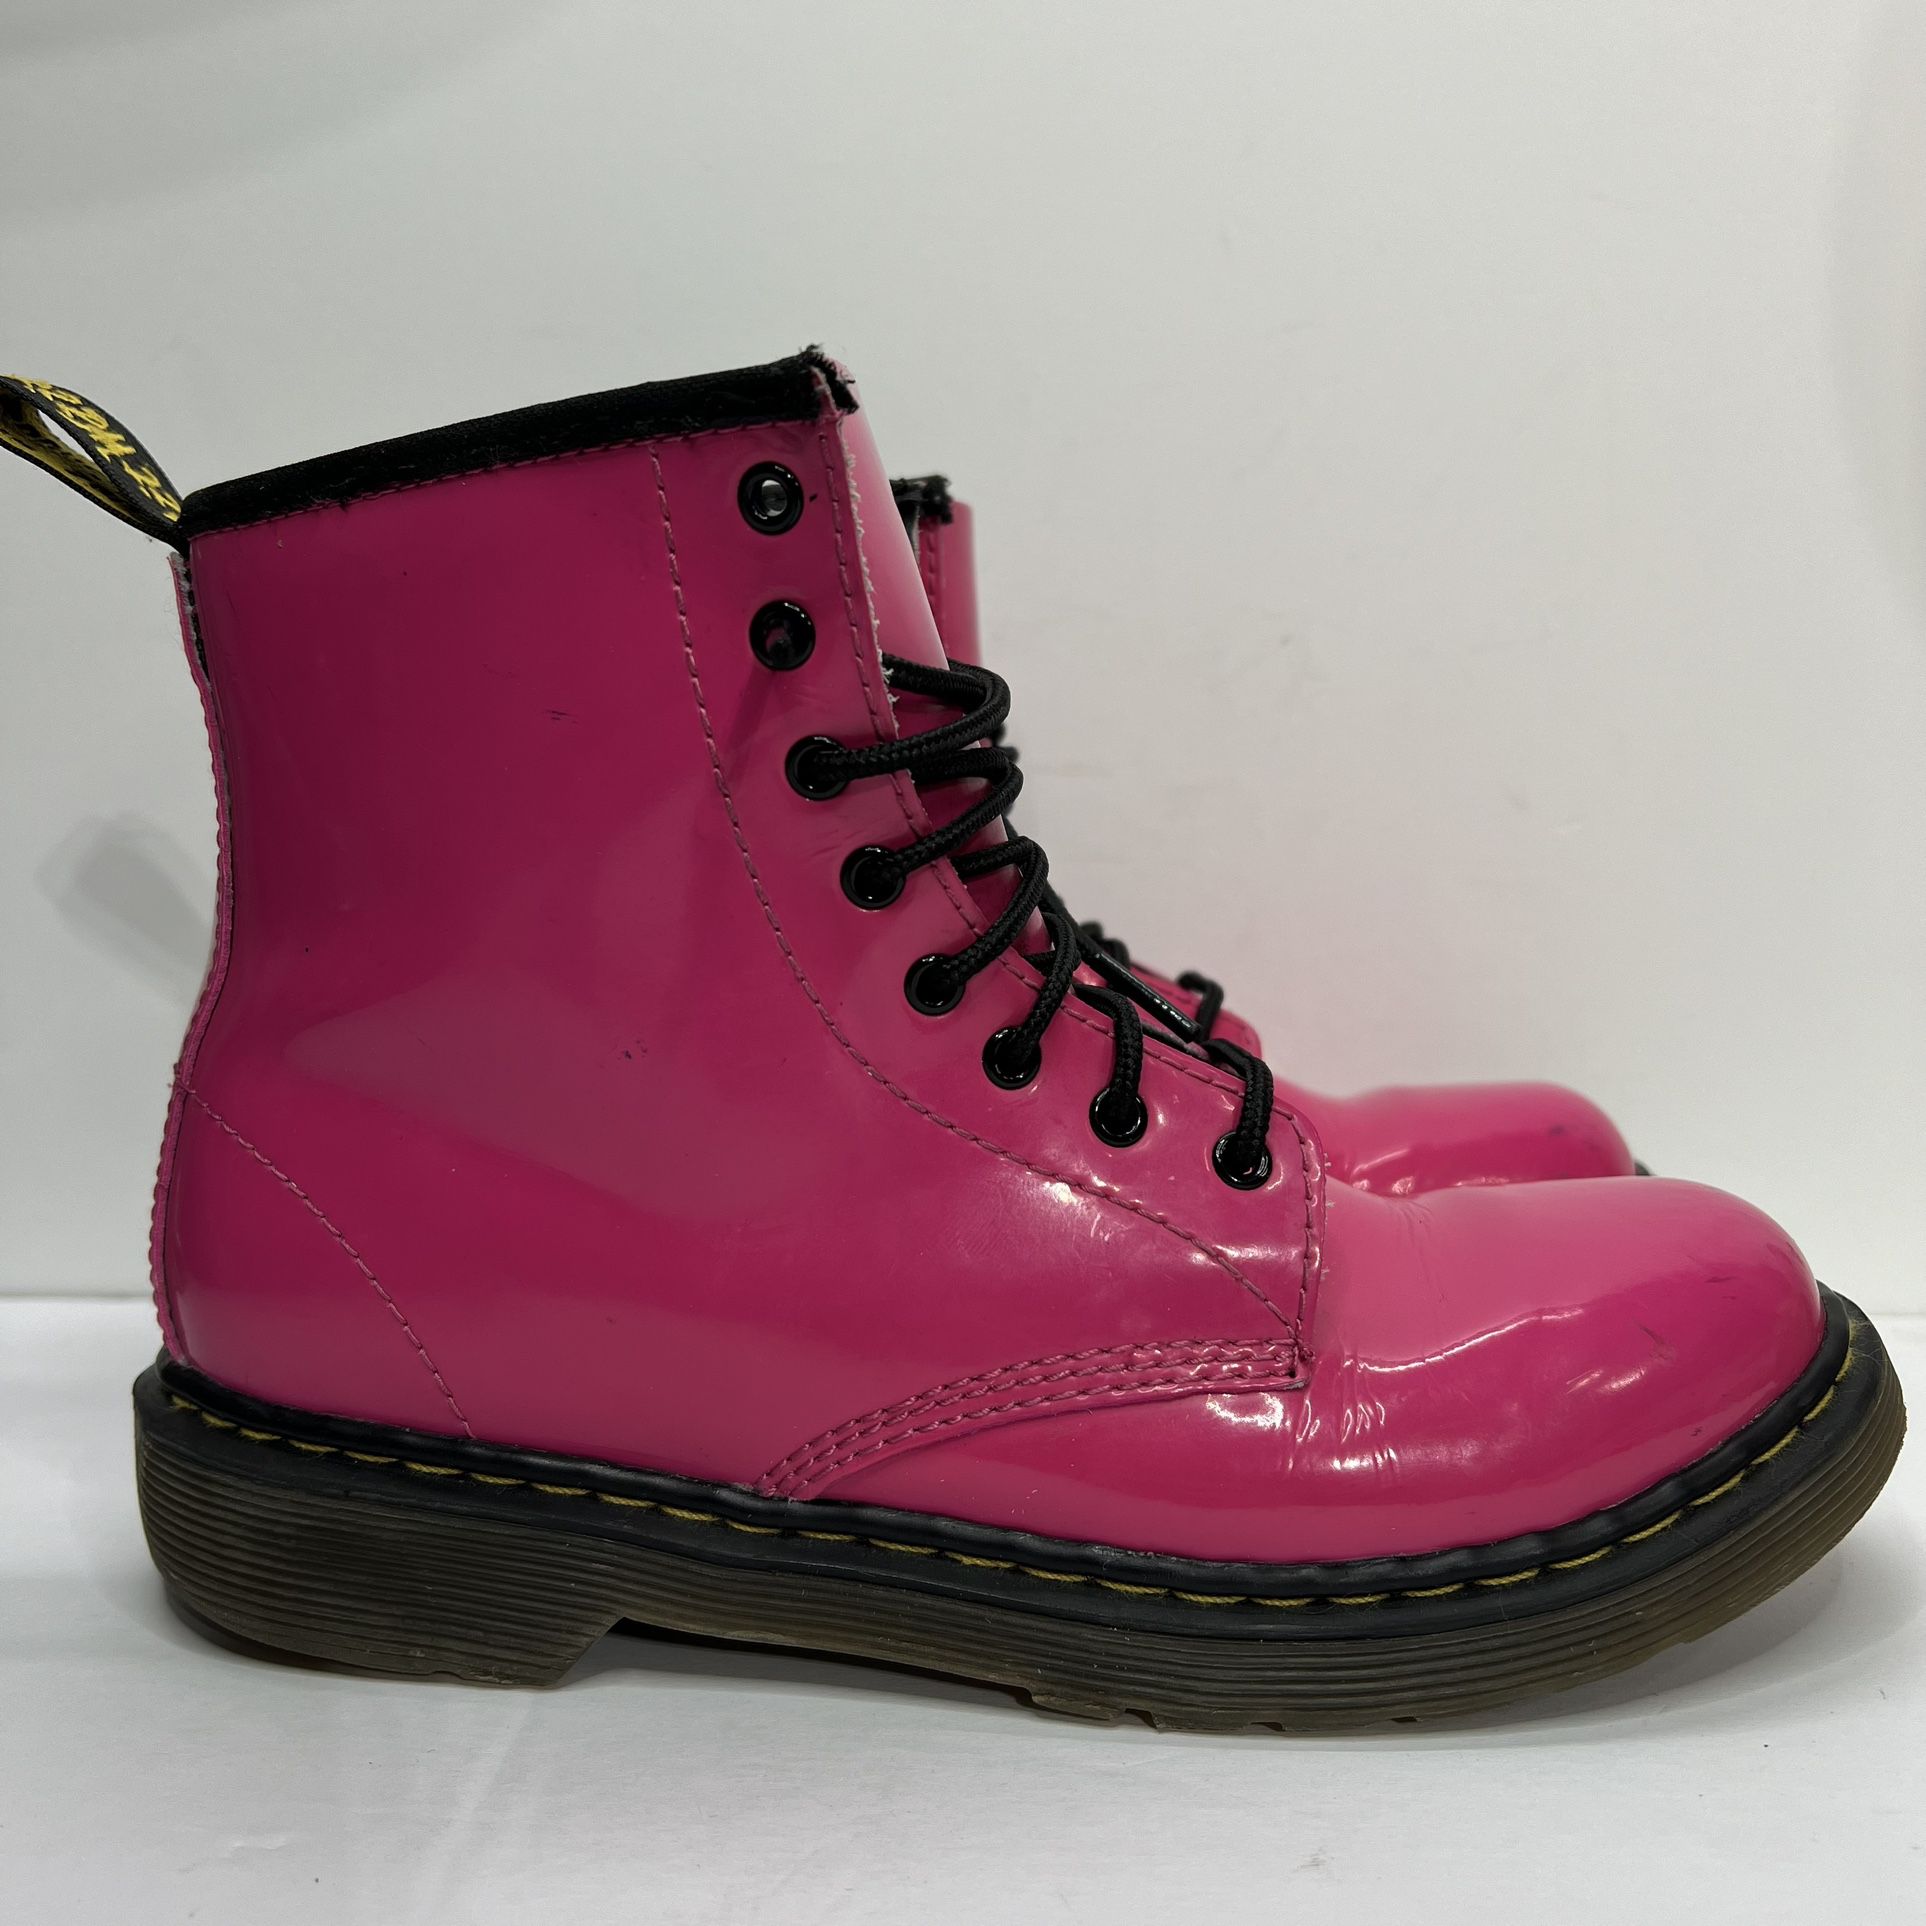 Dr Martens Delaney Youth 4 Women's 5 Hot Pink Patent Leather Combat Boots